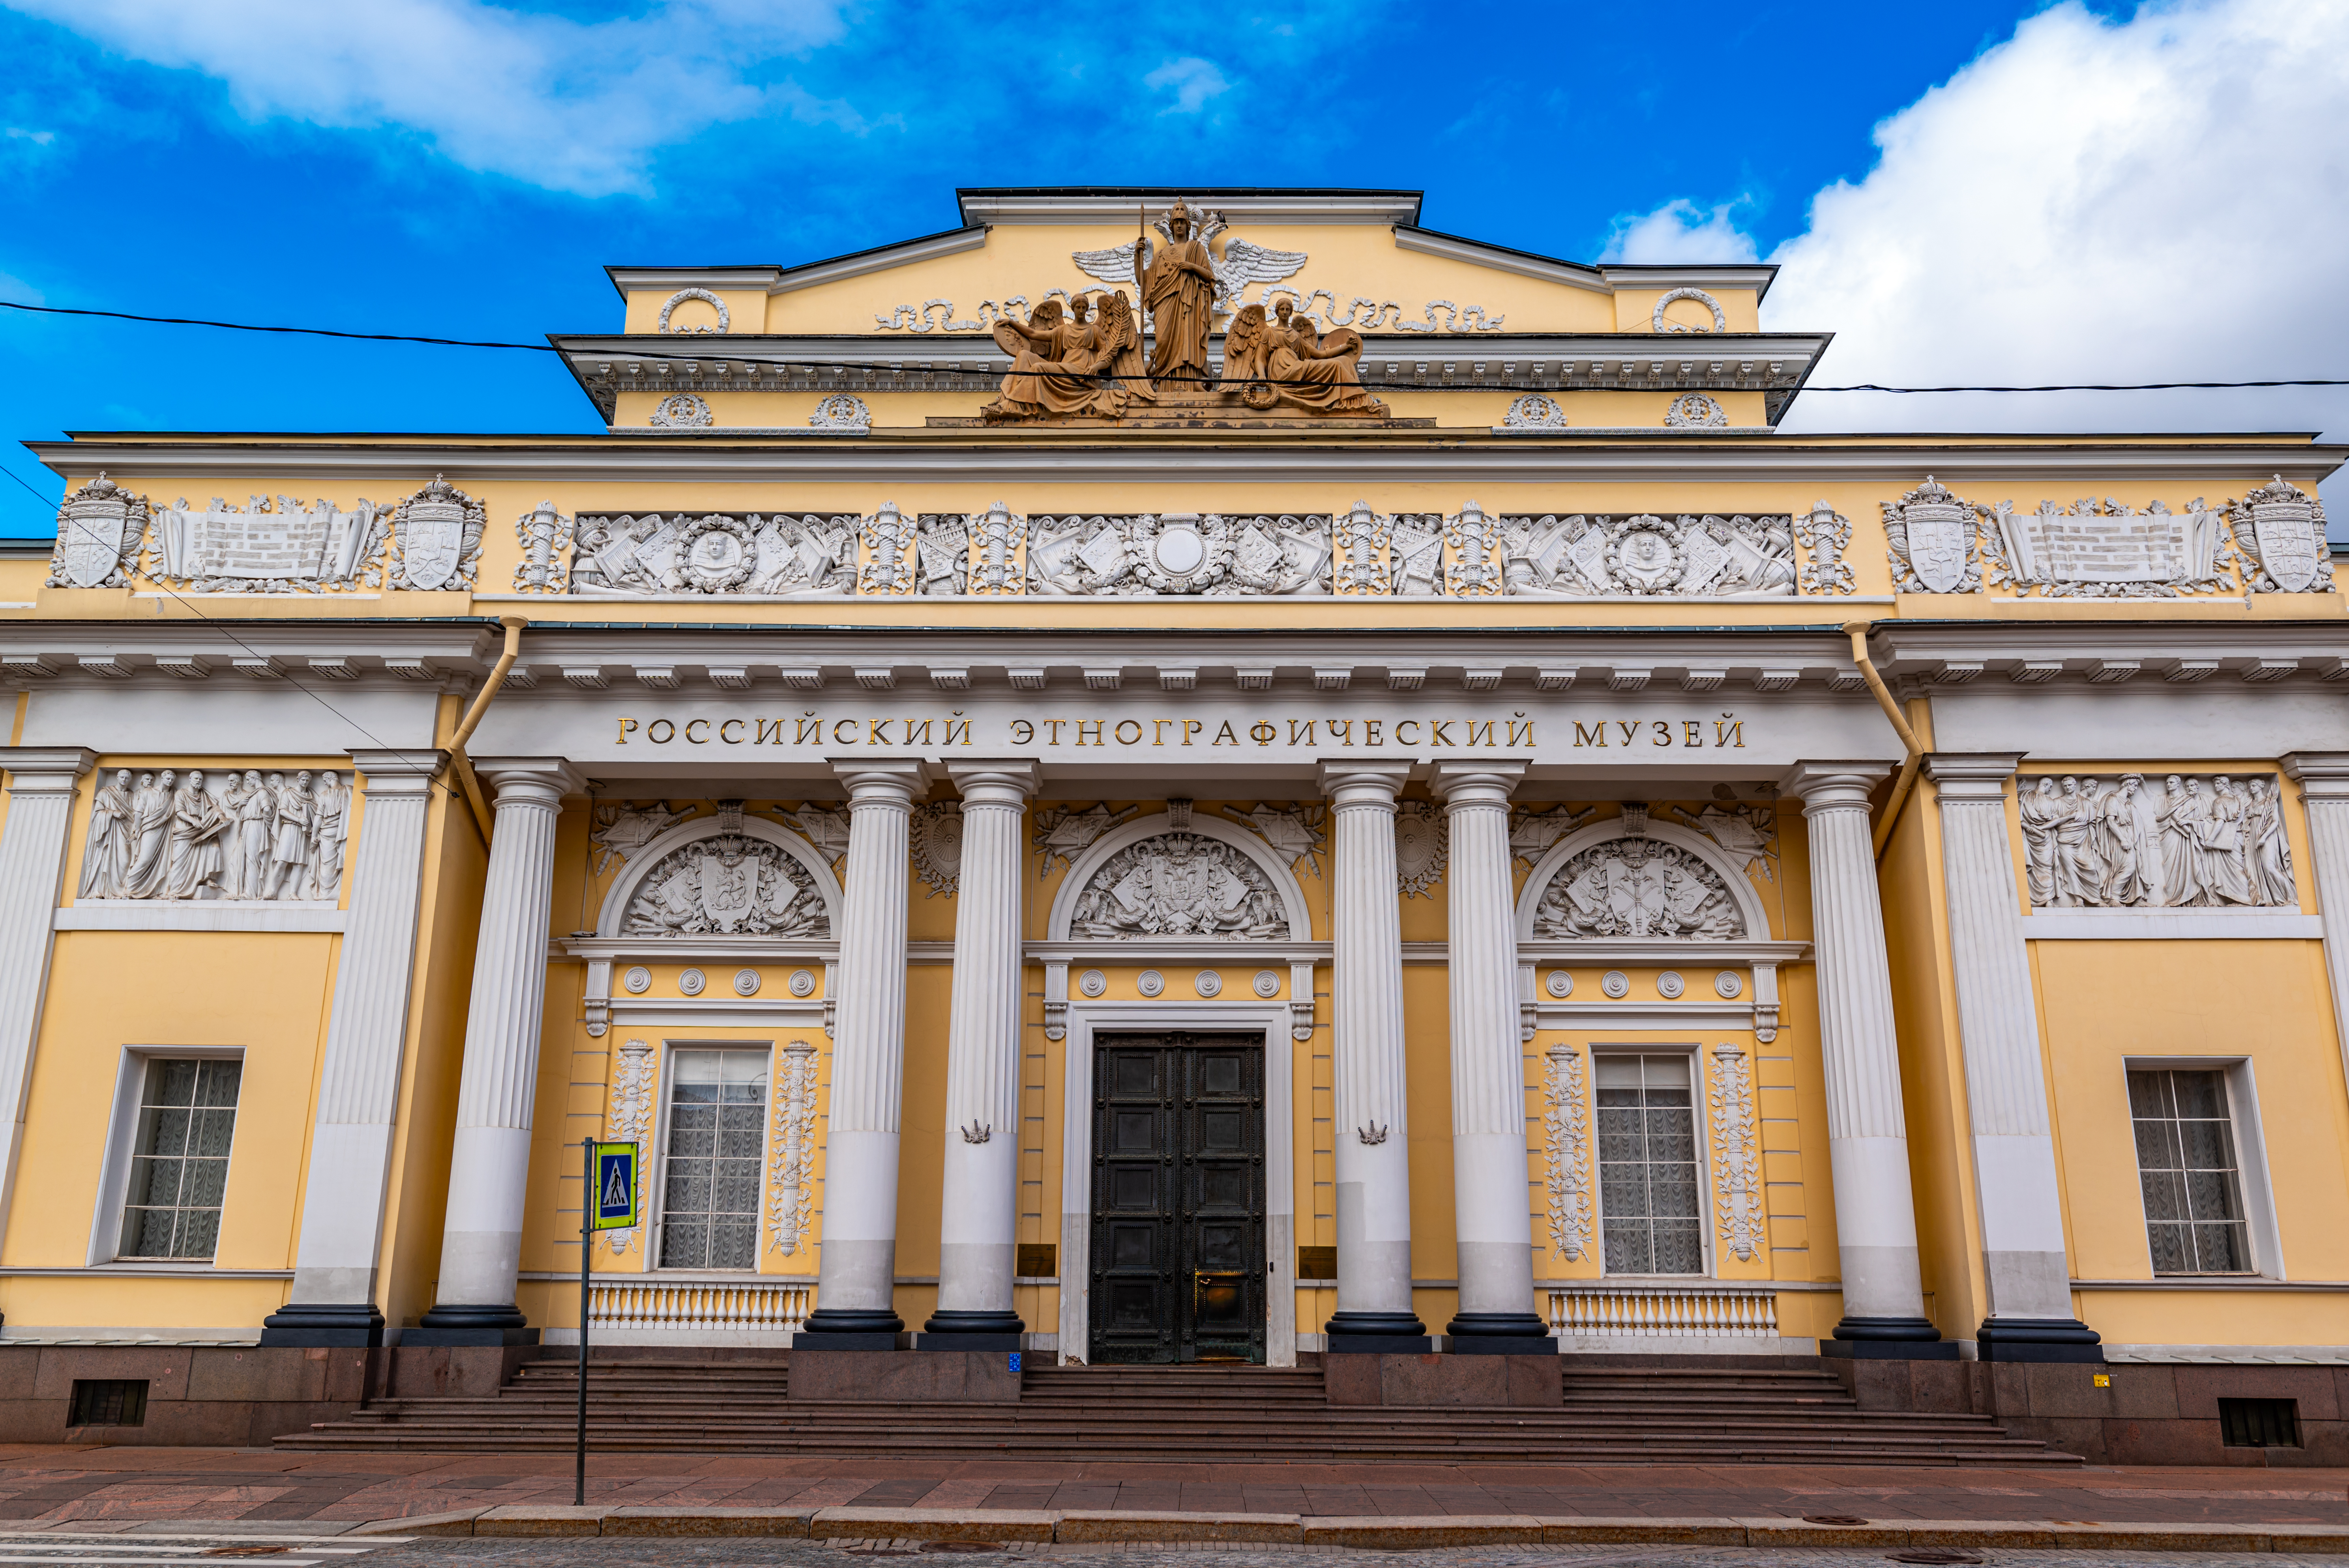 The Russian Museum of Ethnography